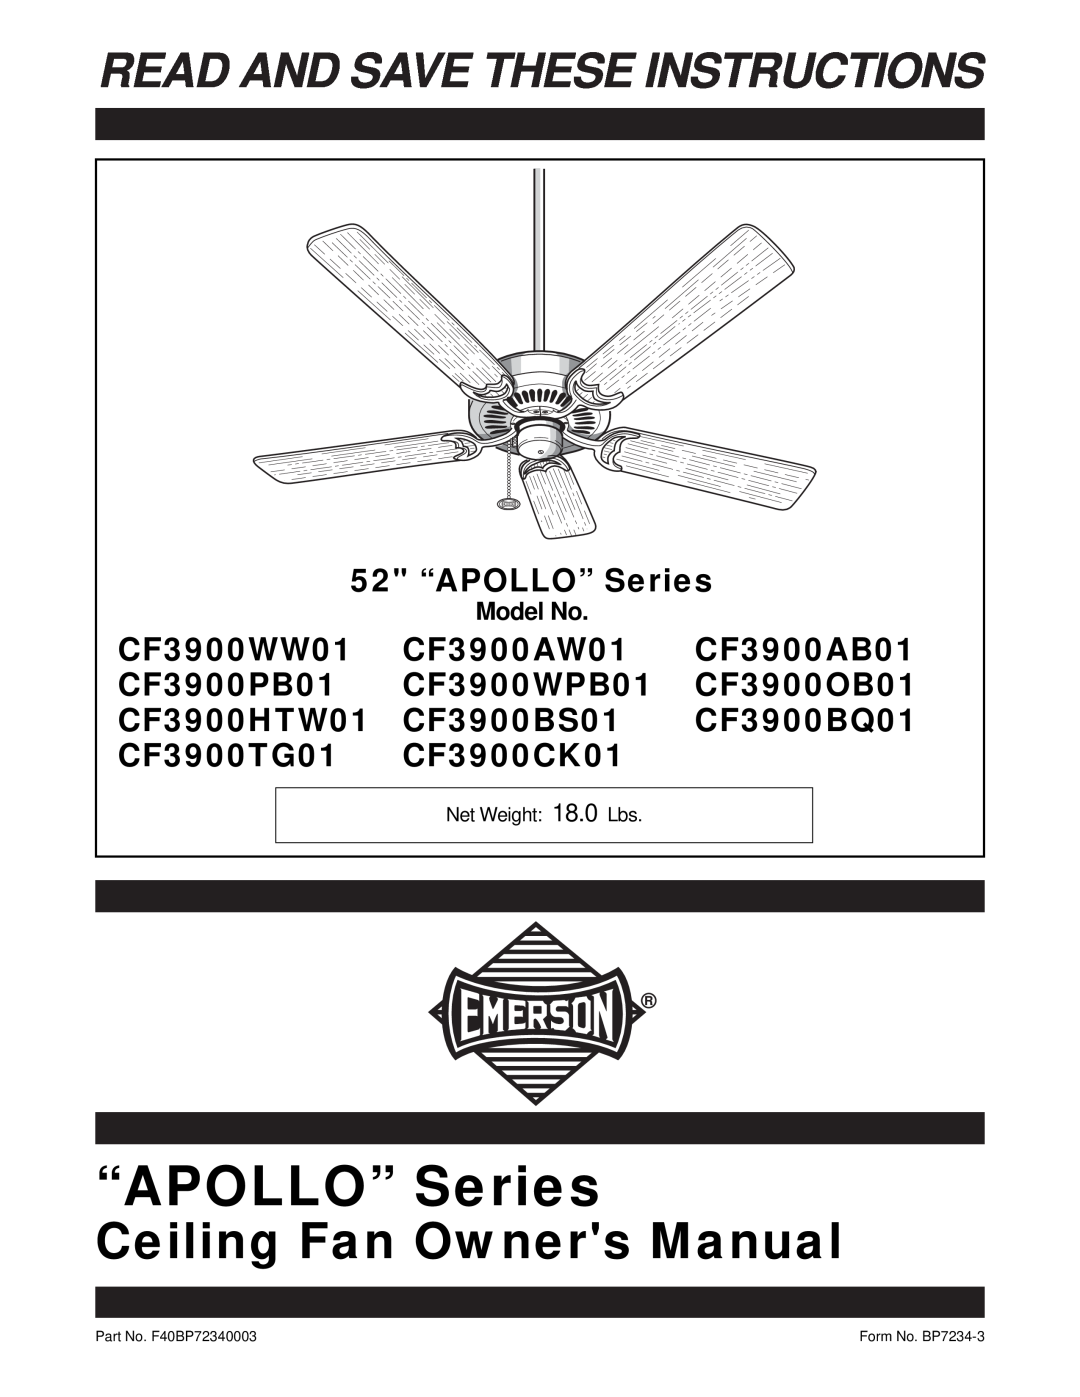 Emerson CF3900WW01 owner manual Model No, Read And Save These Instructions, 52 “APOLLO” Series, Net Weight 18.0 Lbs 